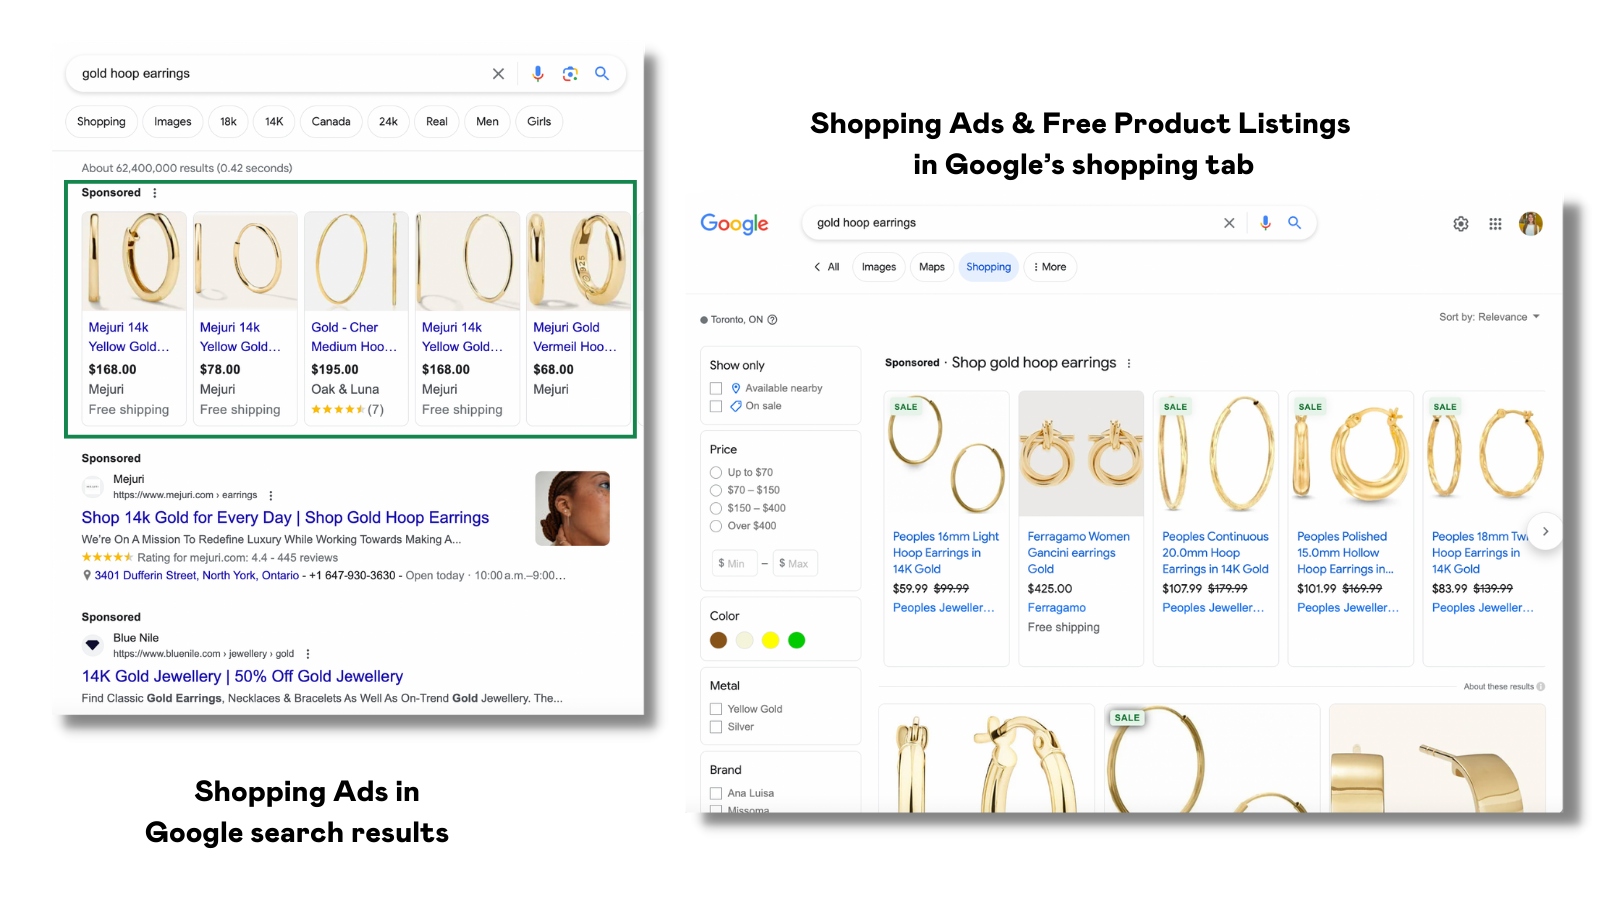 Example of the difference between Shopping Ads in Google search results and the shopping tab